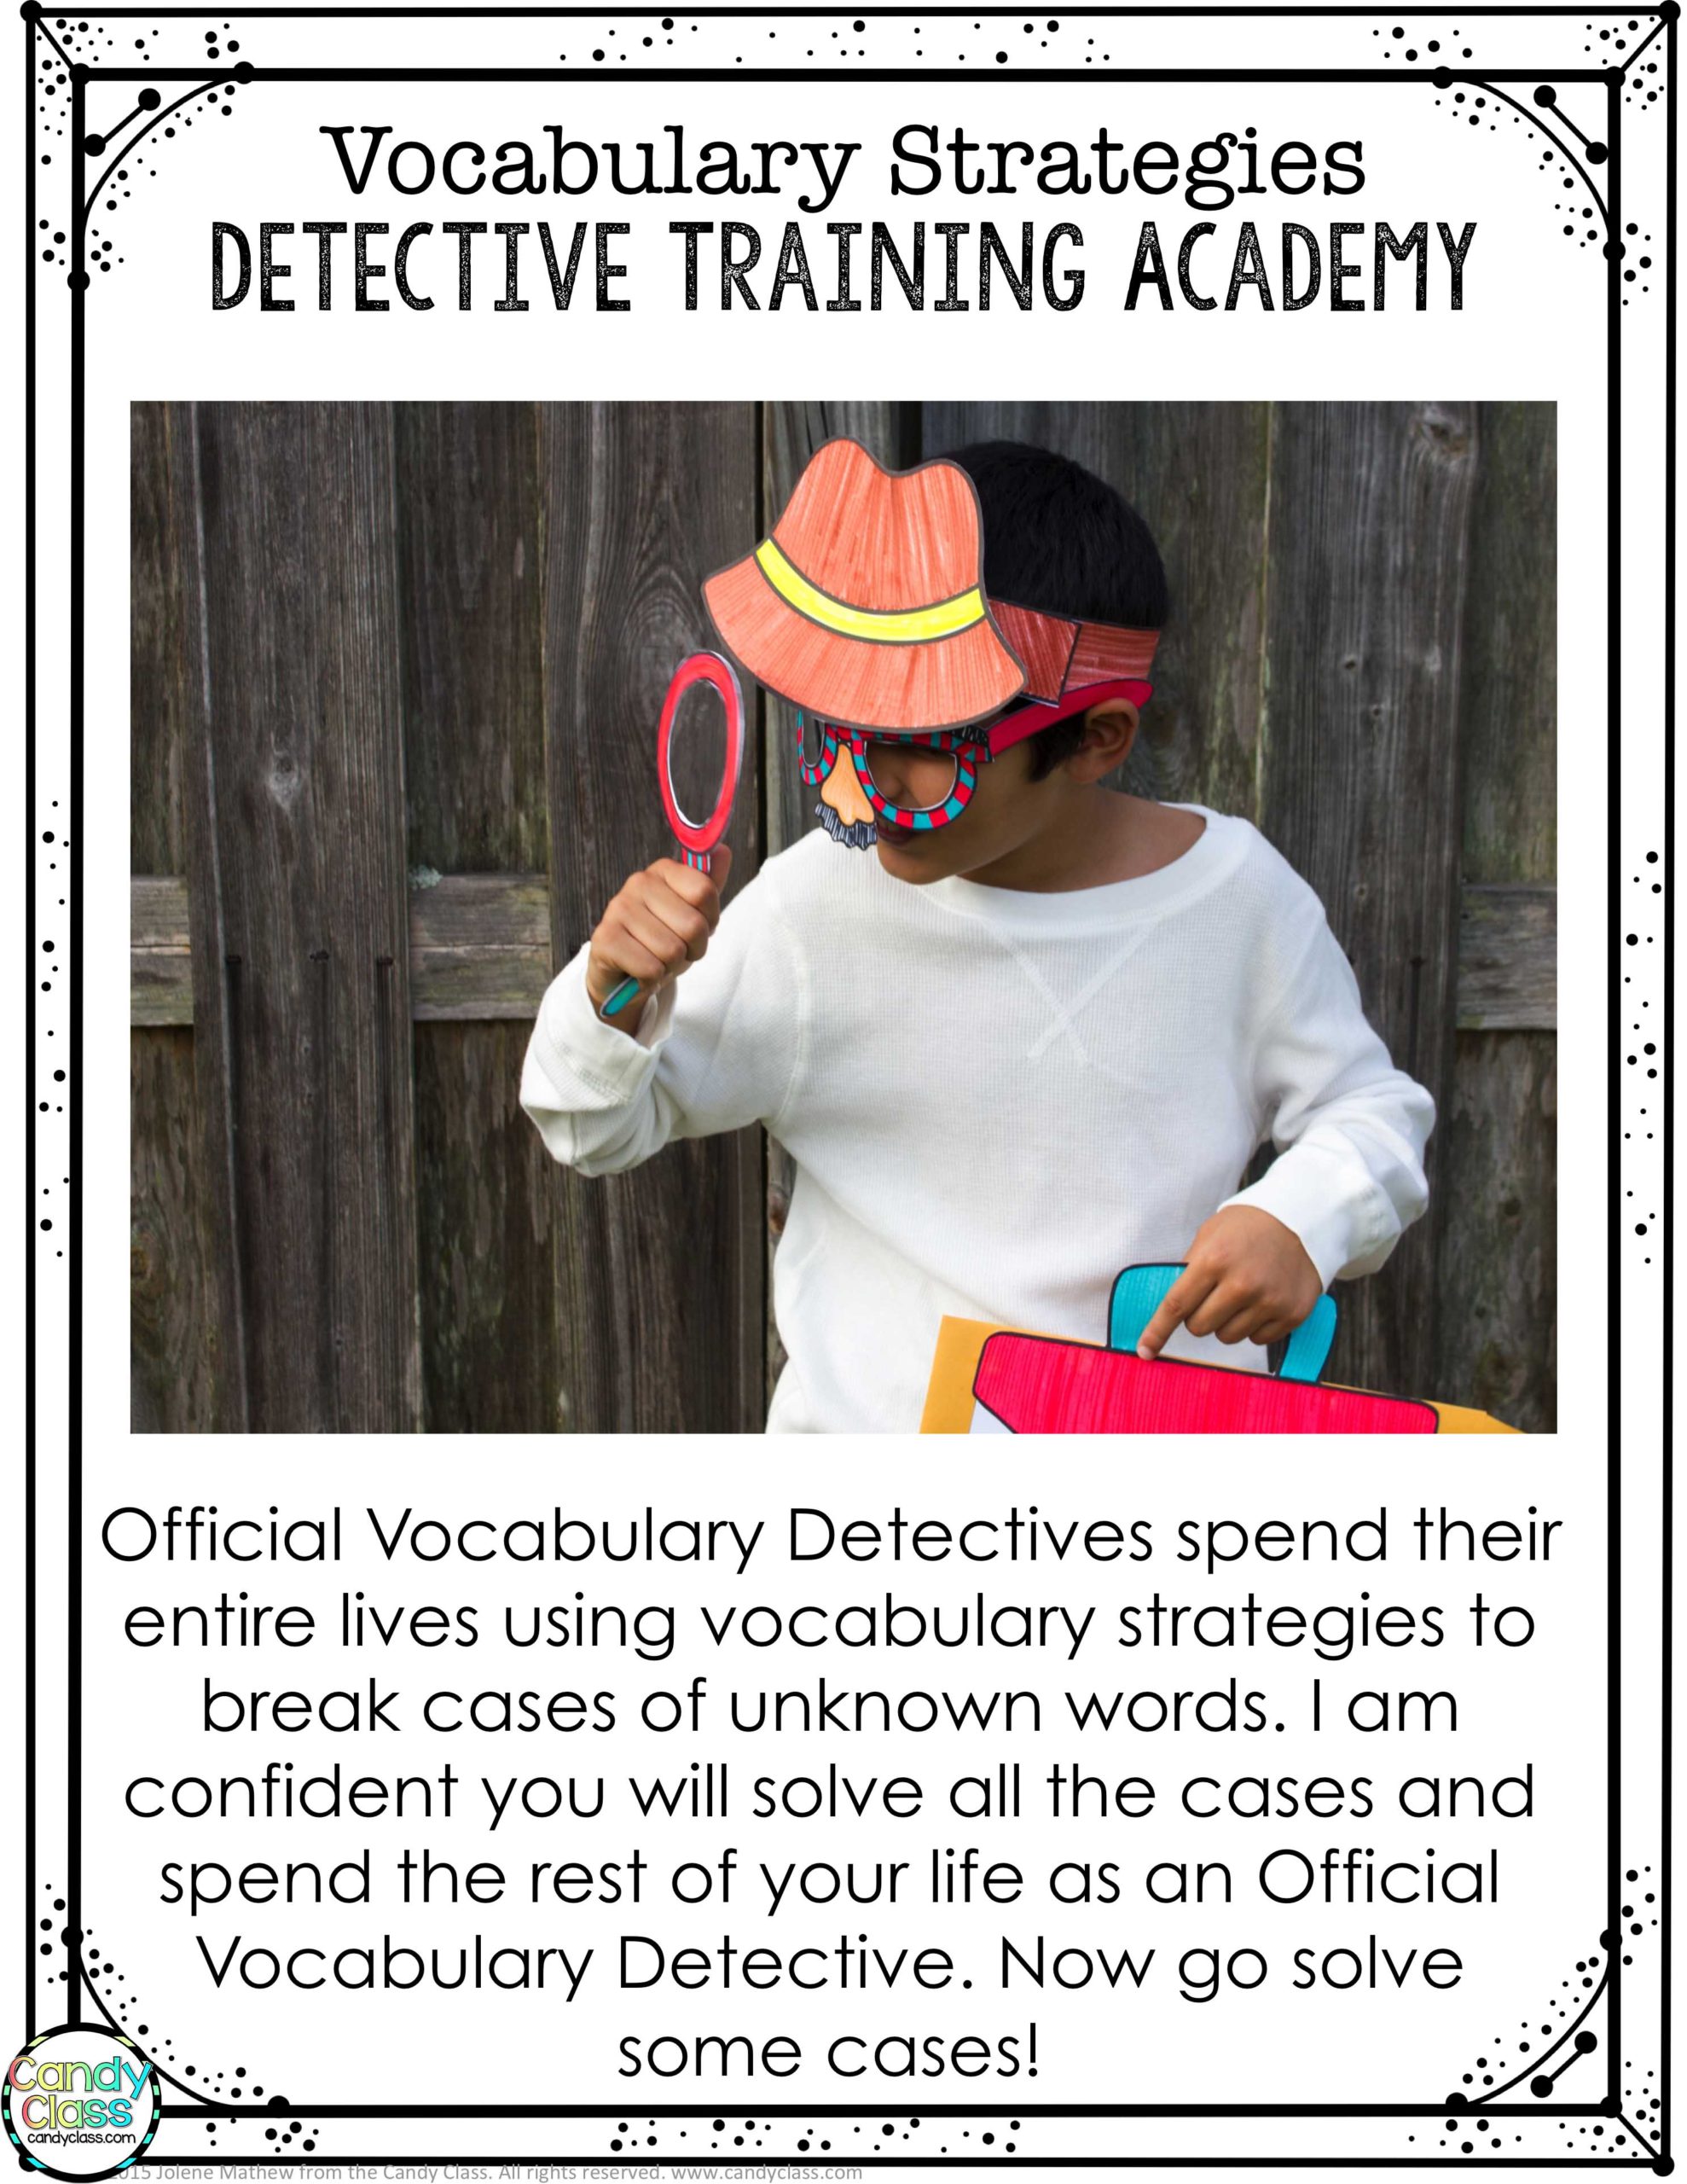 Engage students with a fun detective introduction